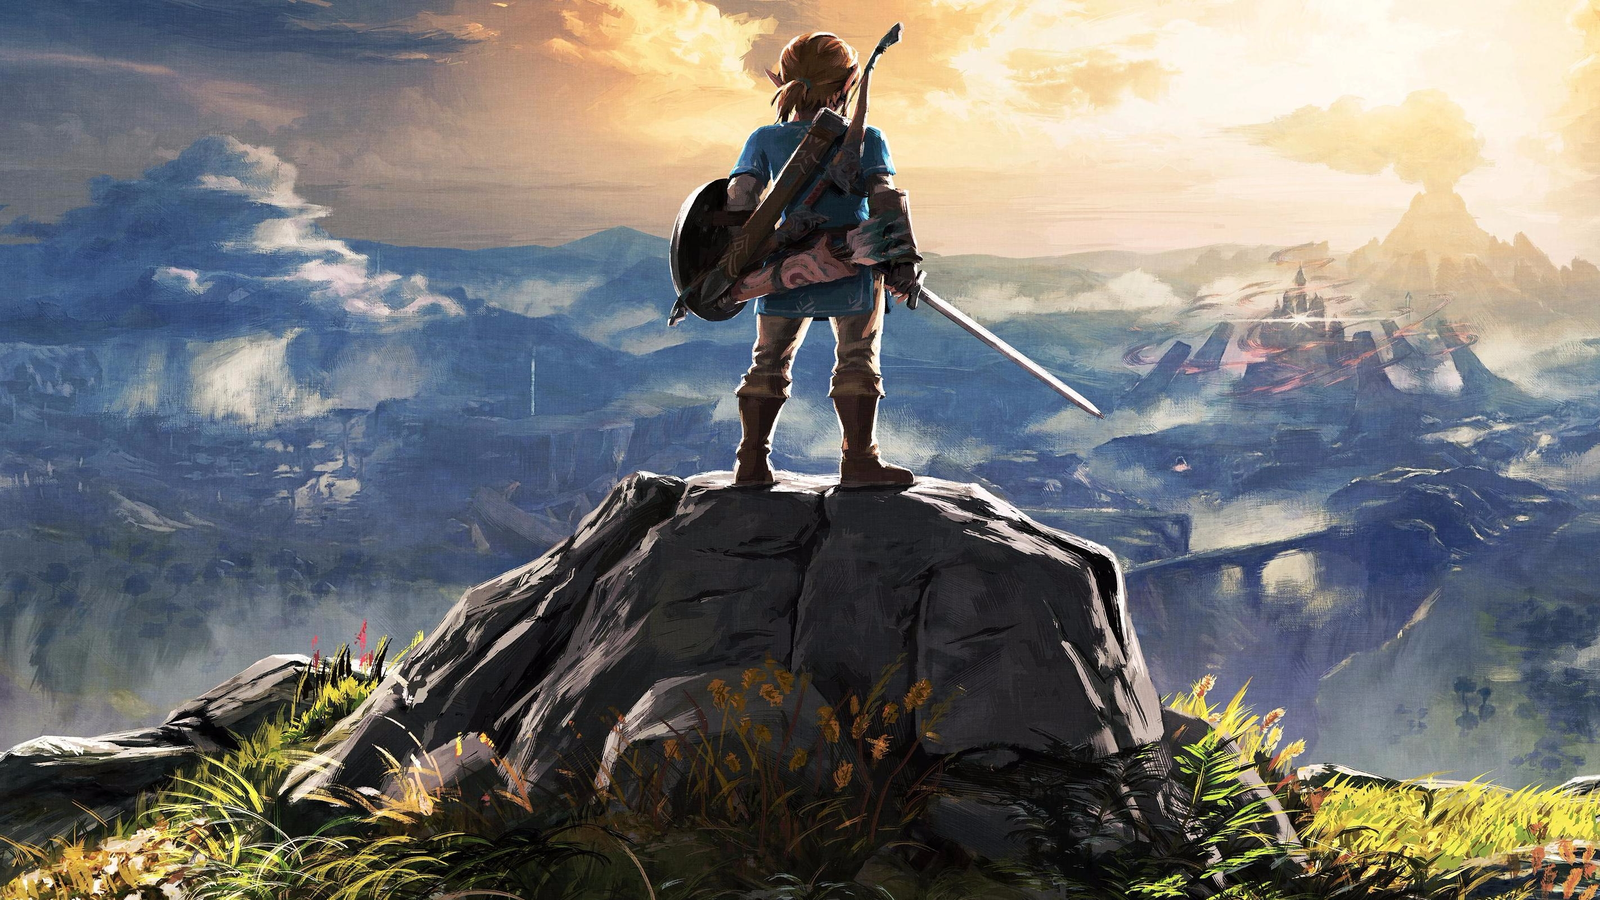 The Legend of Zelda: Breath of the Wild' Turns 5: The Radical